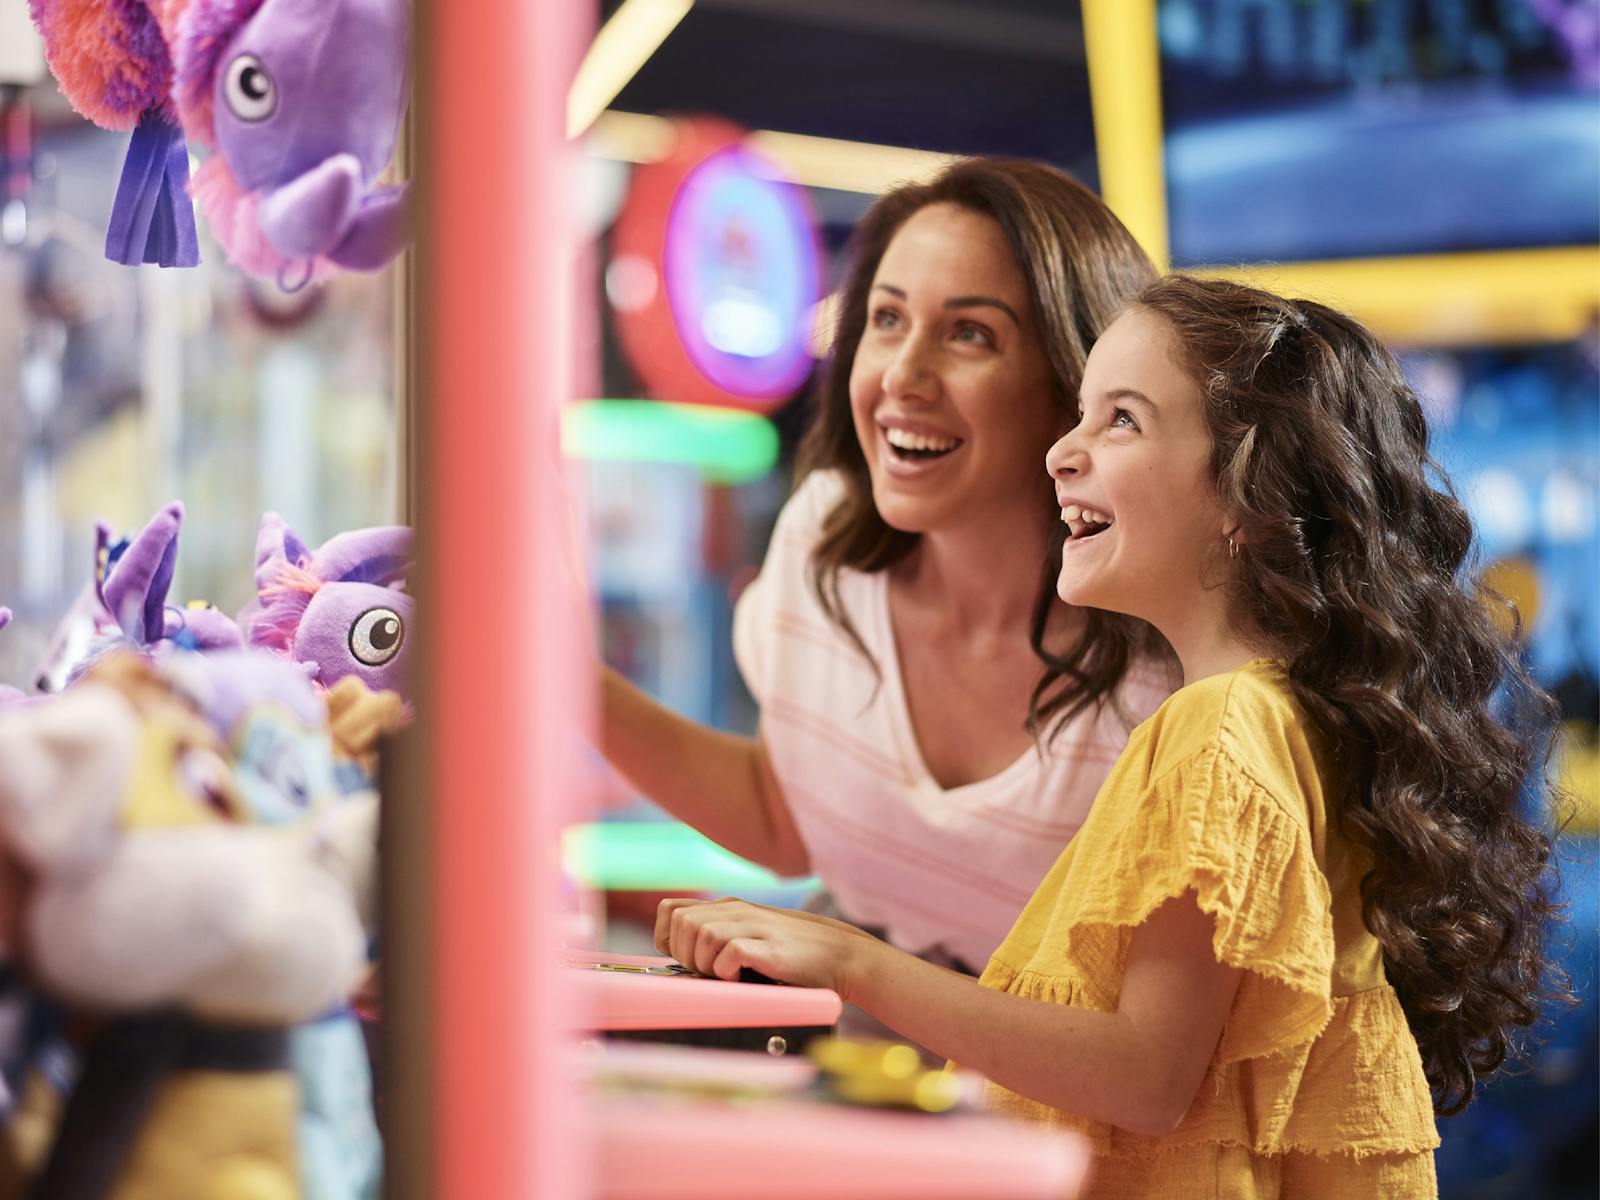 Mum and daughter trying their luck at winning a soft toy by playing a skilltester